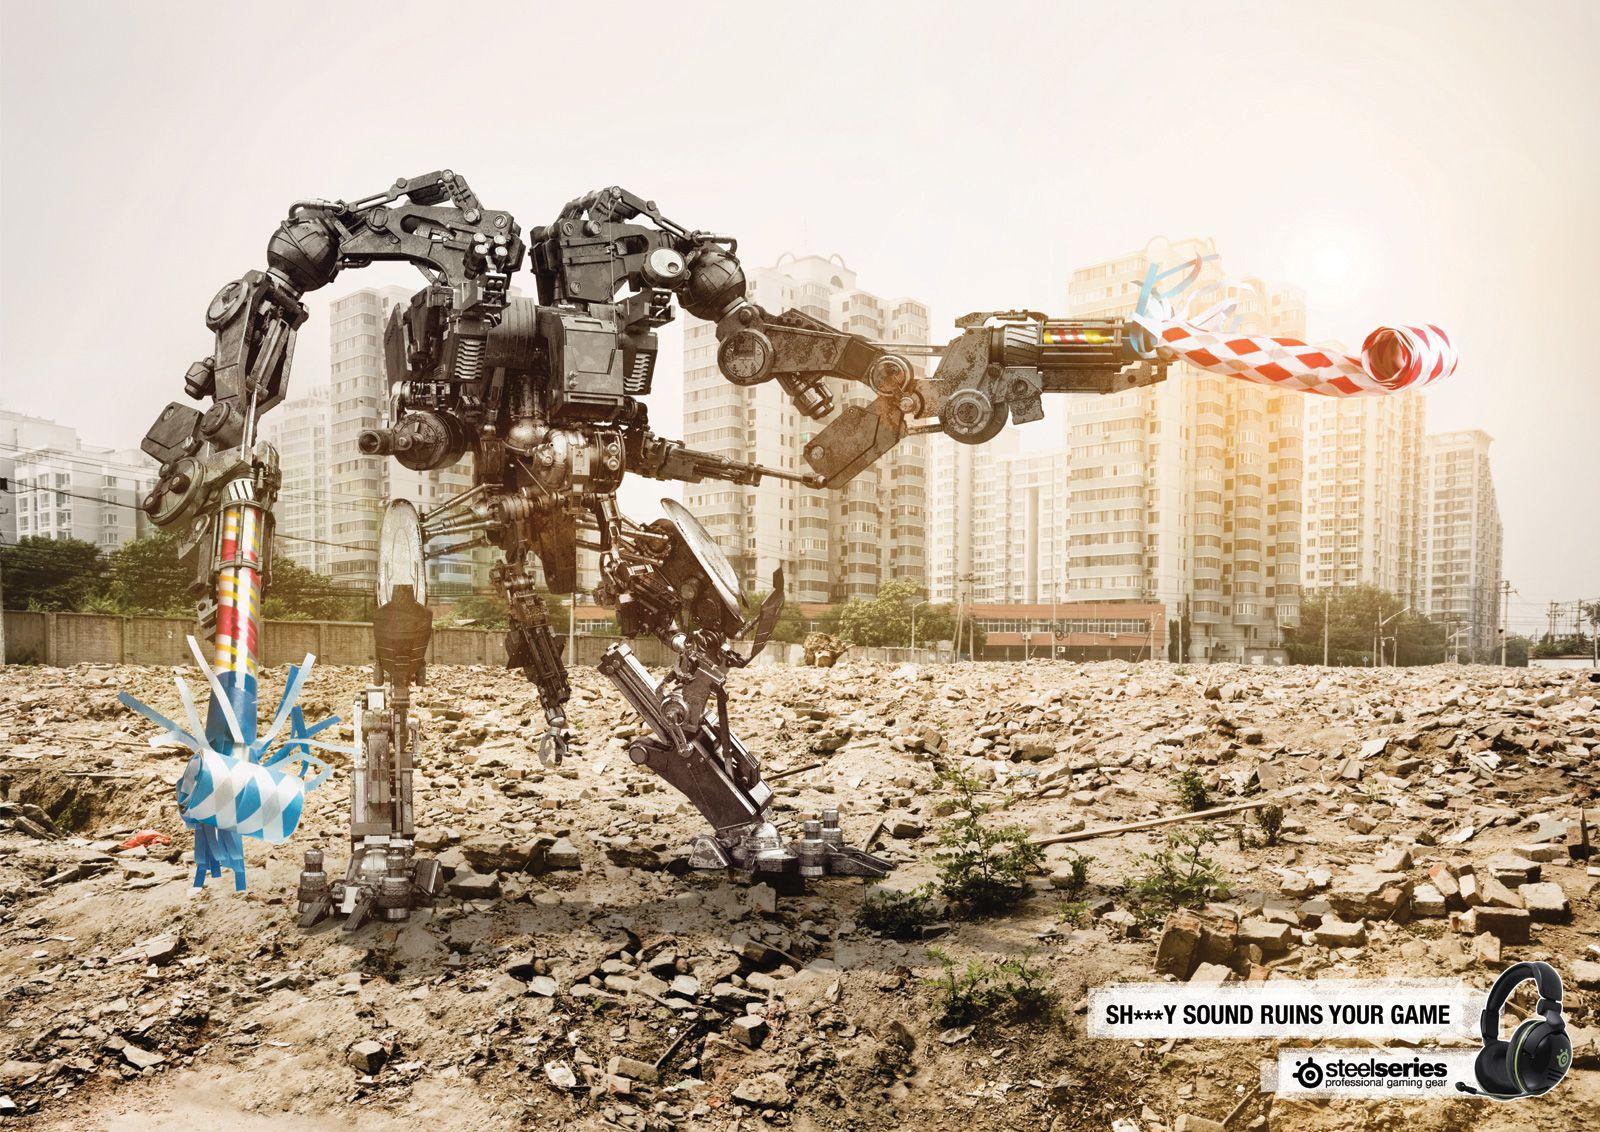 SteelSeries Print Advert By BBDO: Robot. Ads of the World™